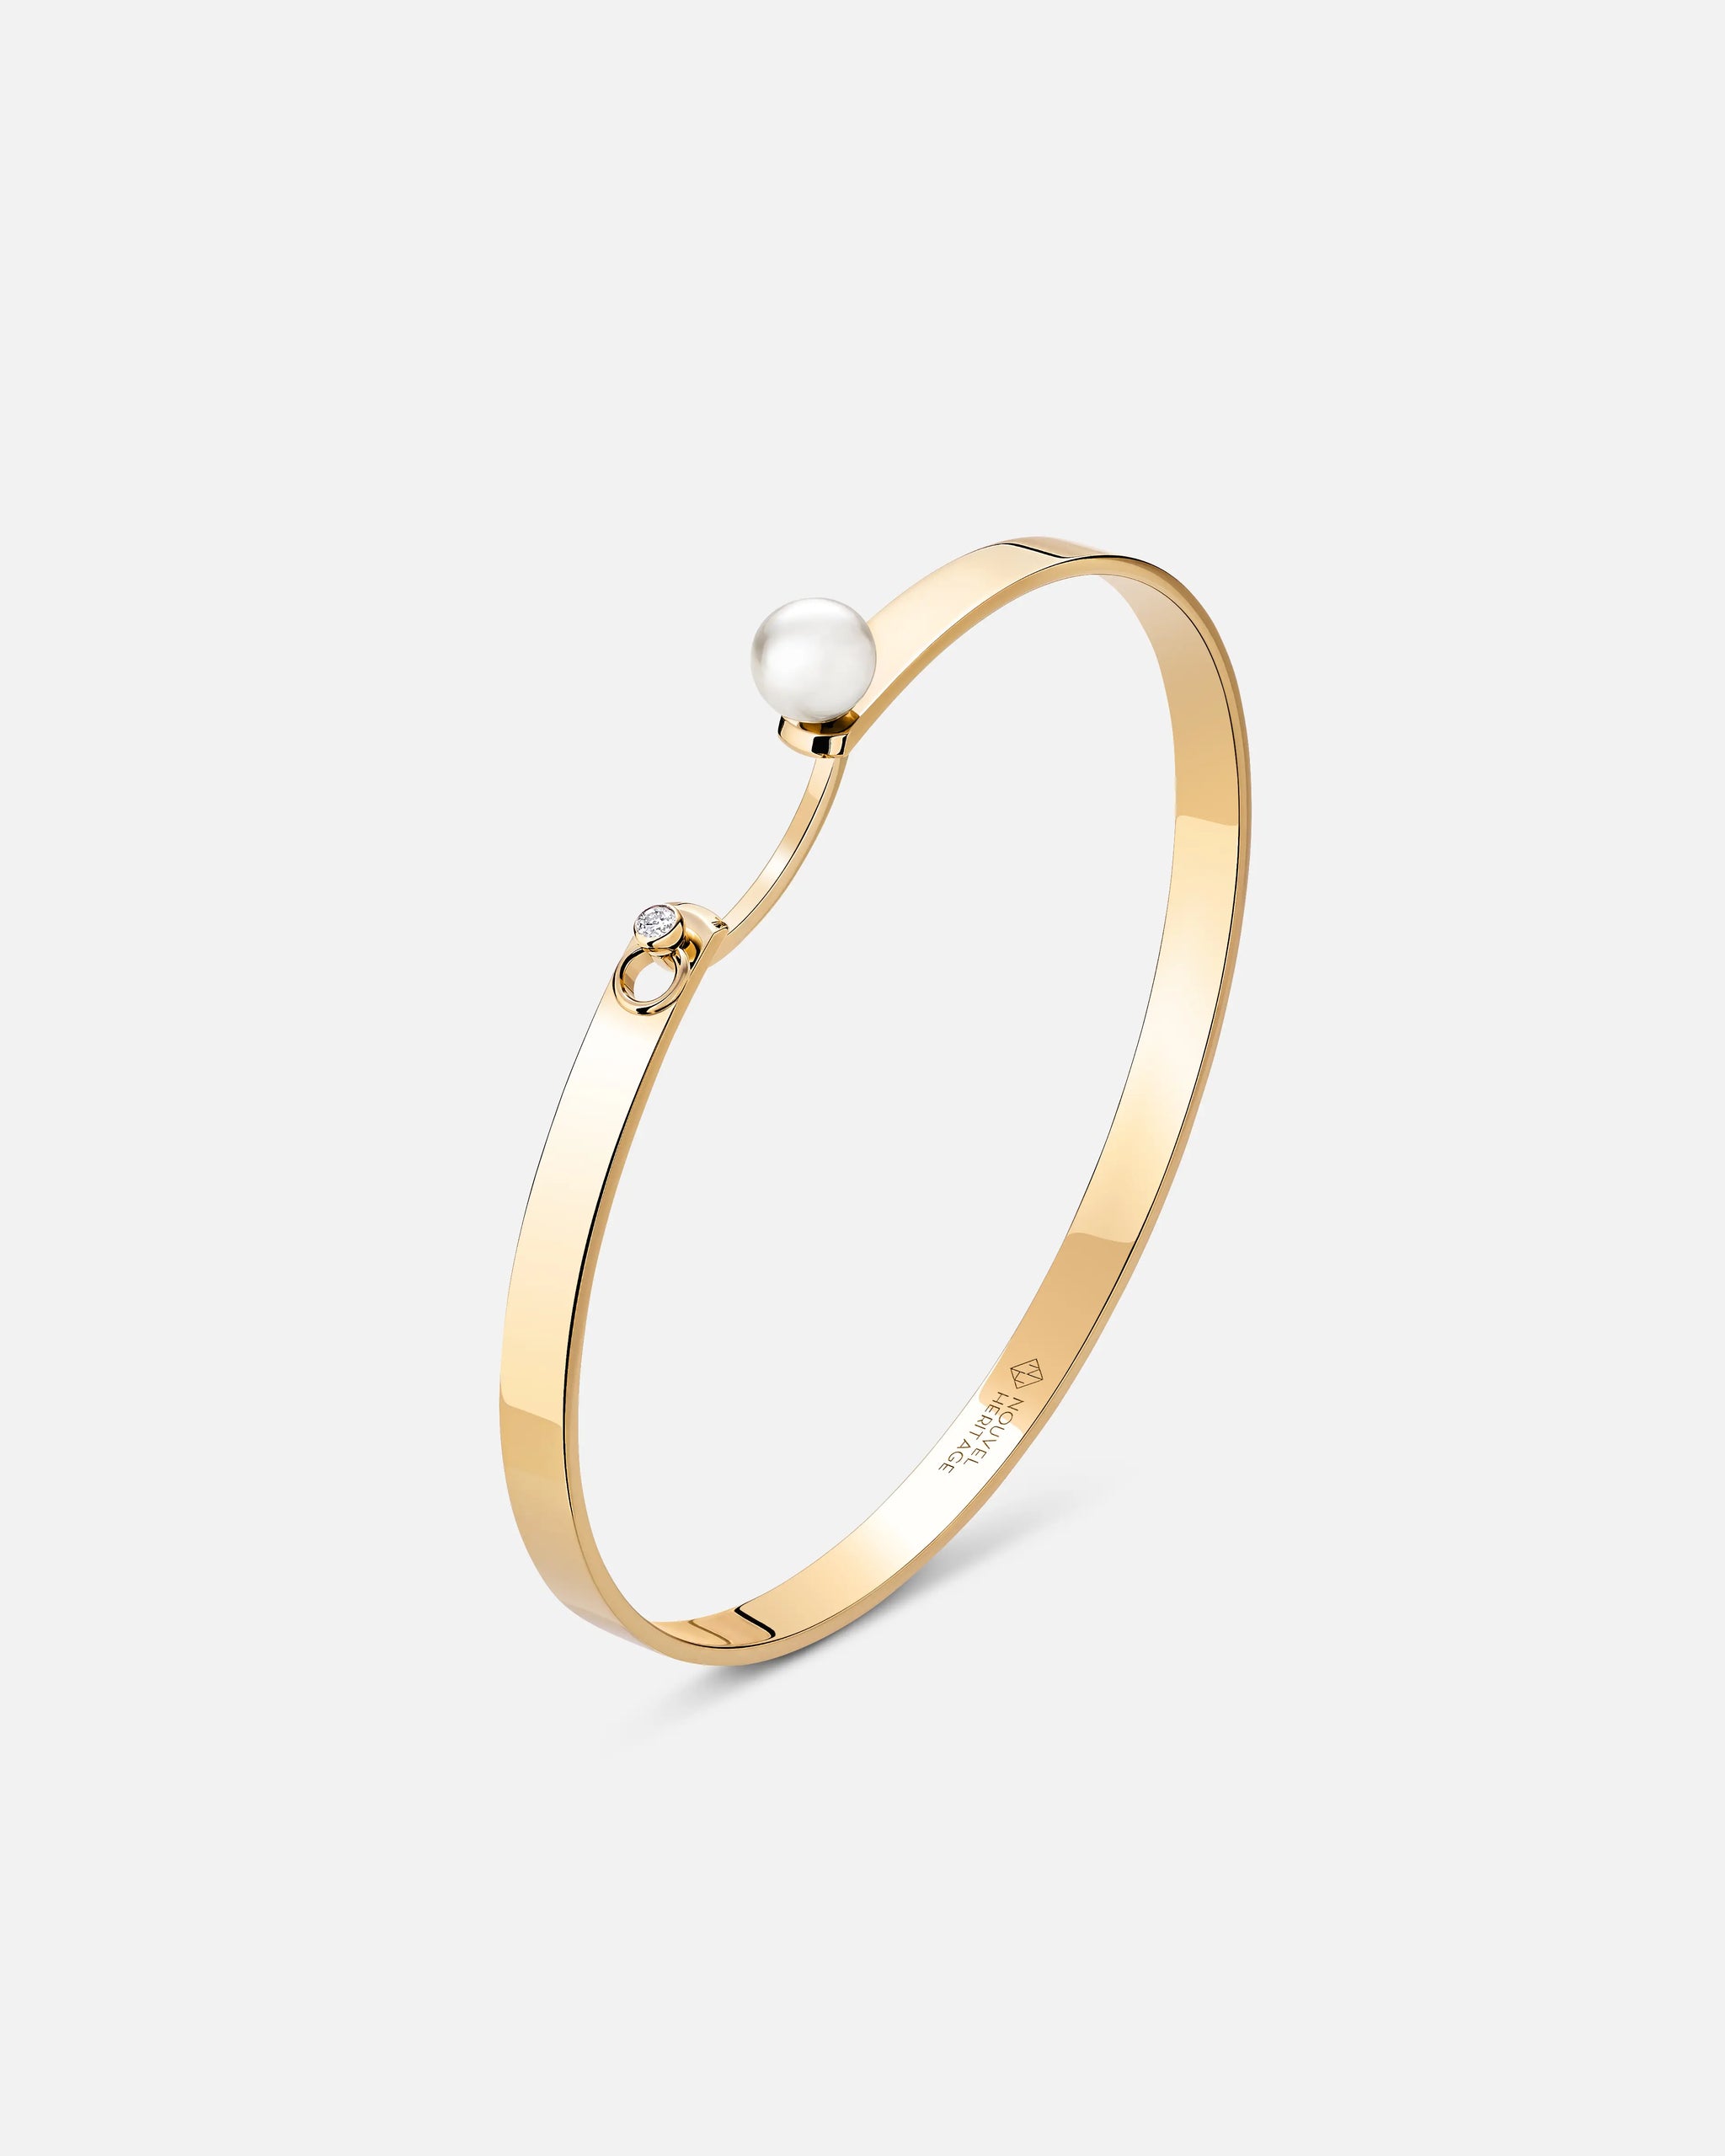 Lunch With Mom Mood Bangle in Yellow Gold - 1 - Nouvel Heritage